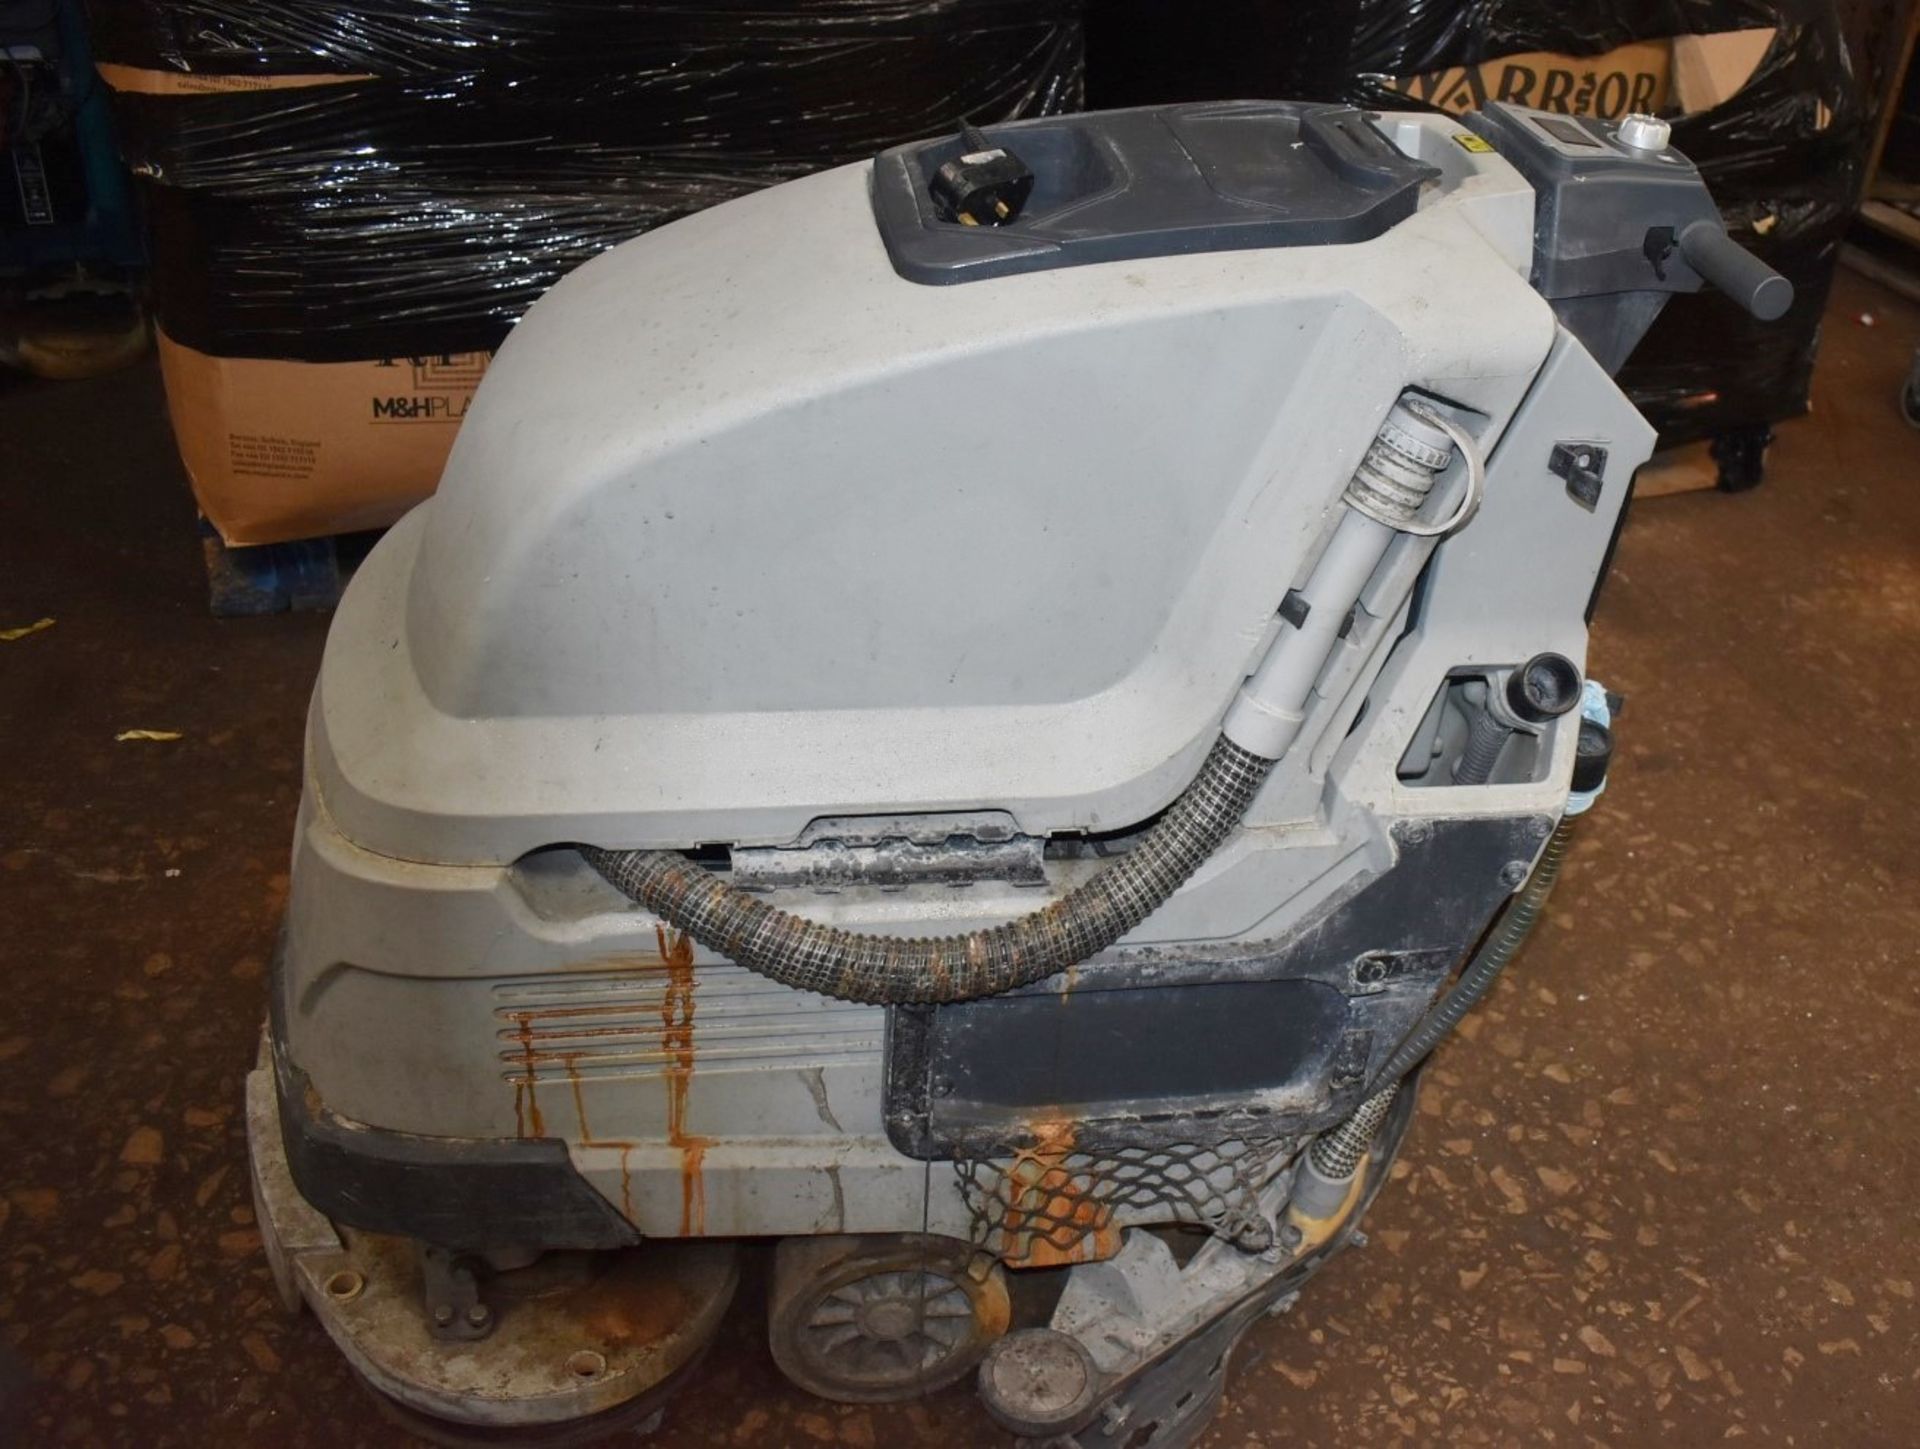 1 x Ice Scrub 65D Commercial Floor Scrubber Dryer - Recently Removed From a Supermarket - Image 16 of 16